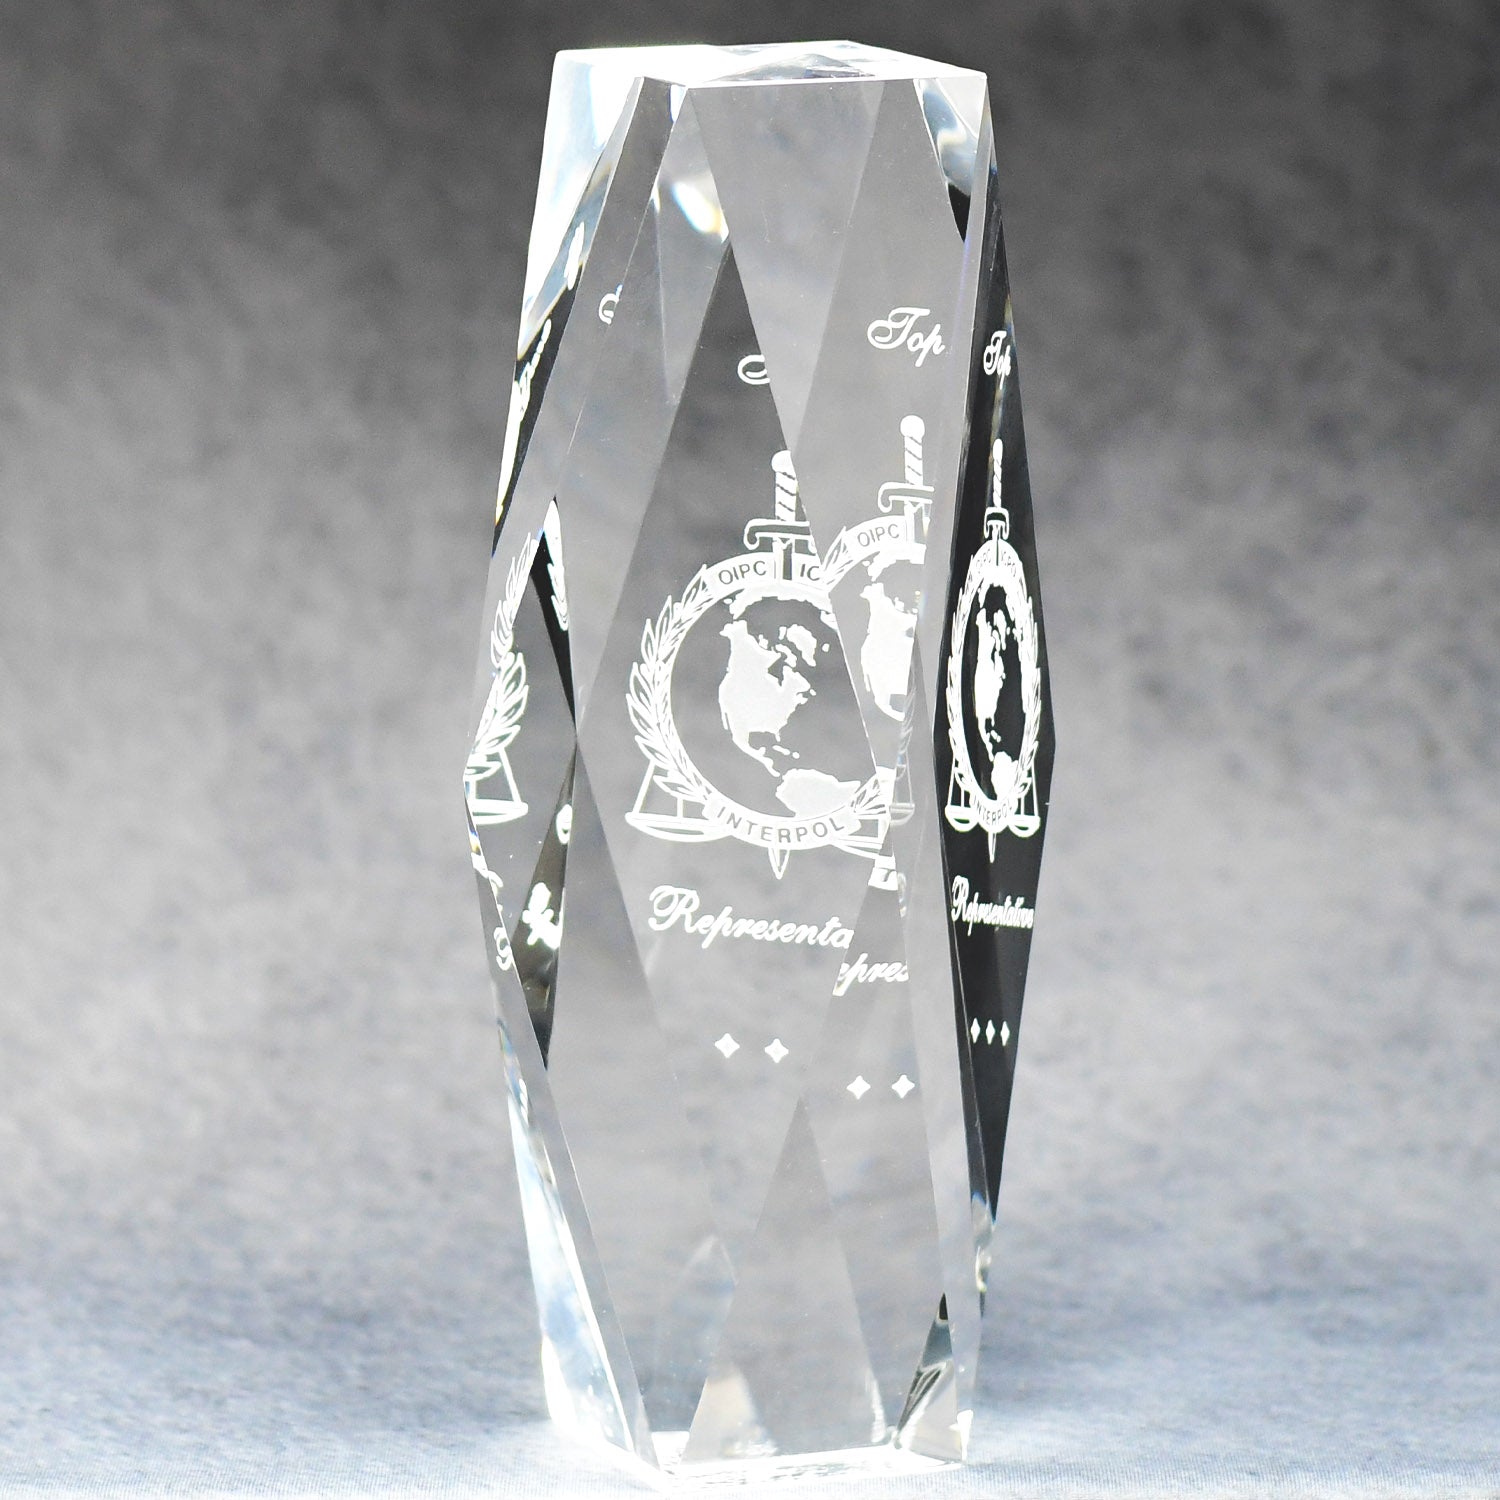 Multi-Faceted Optic Crystal Tower | Alliance Awards LLC.